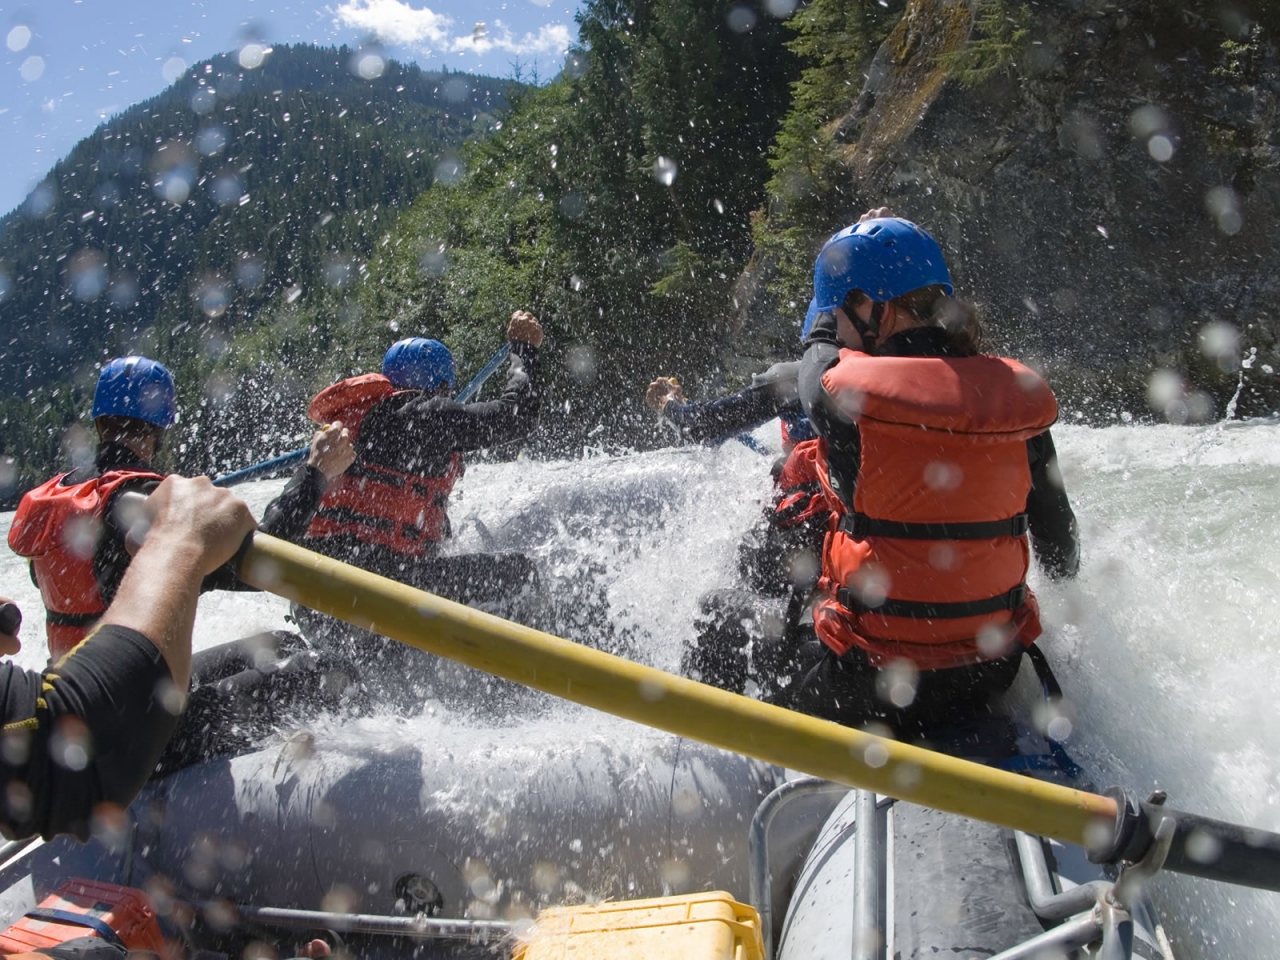 Rafting team for 1280 x 960 resolution